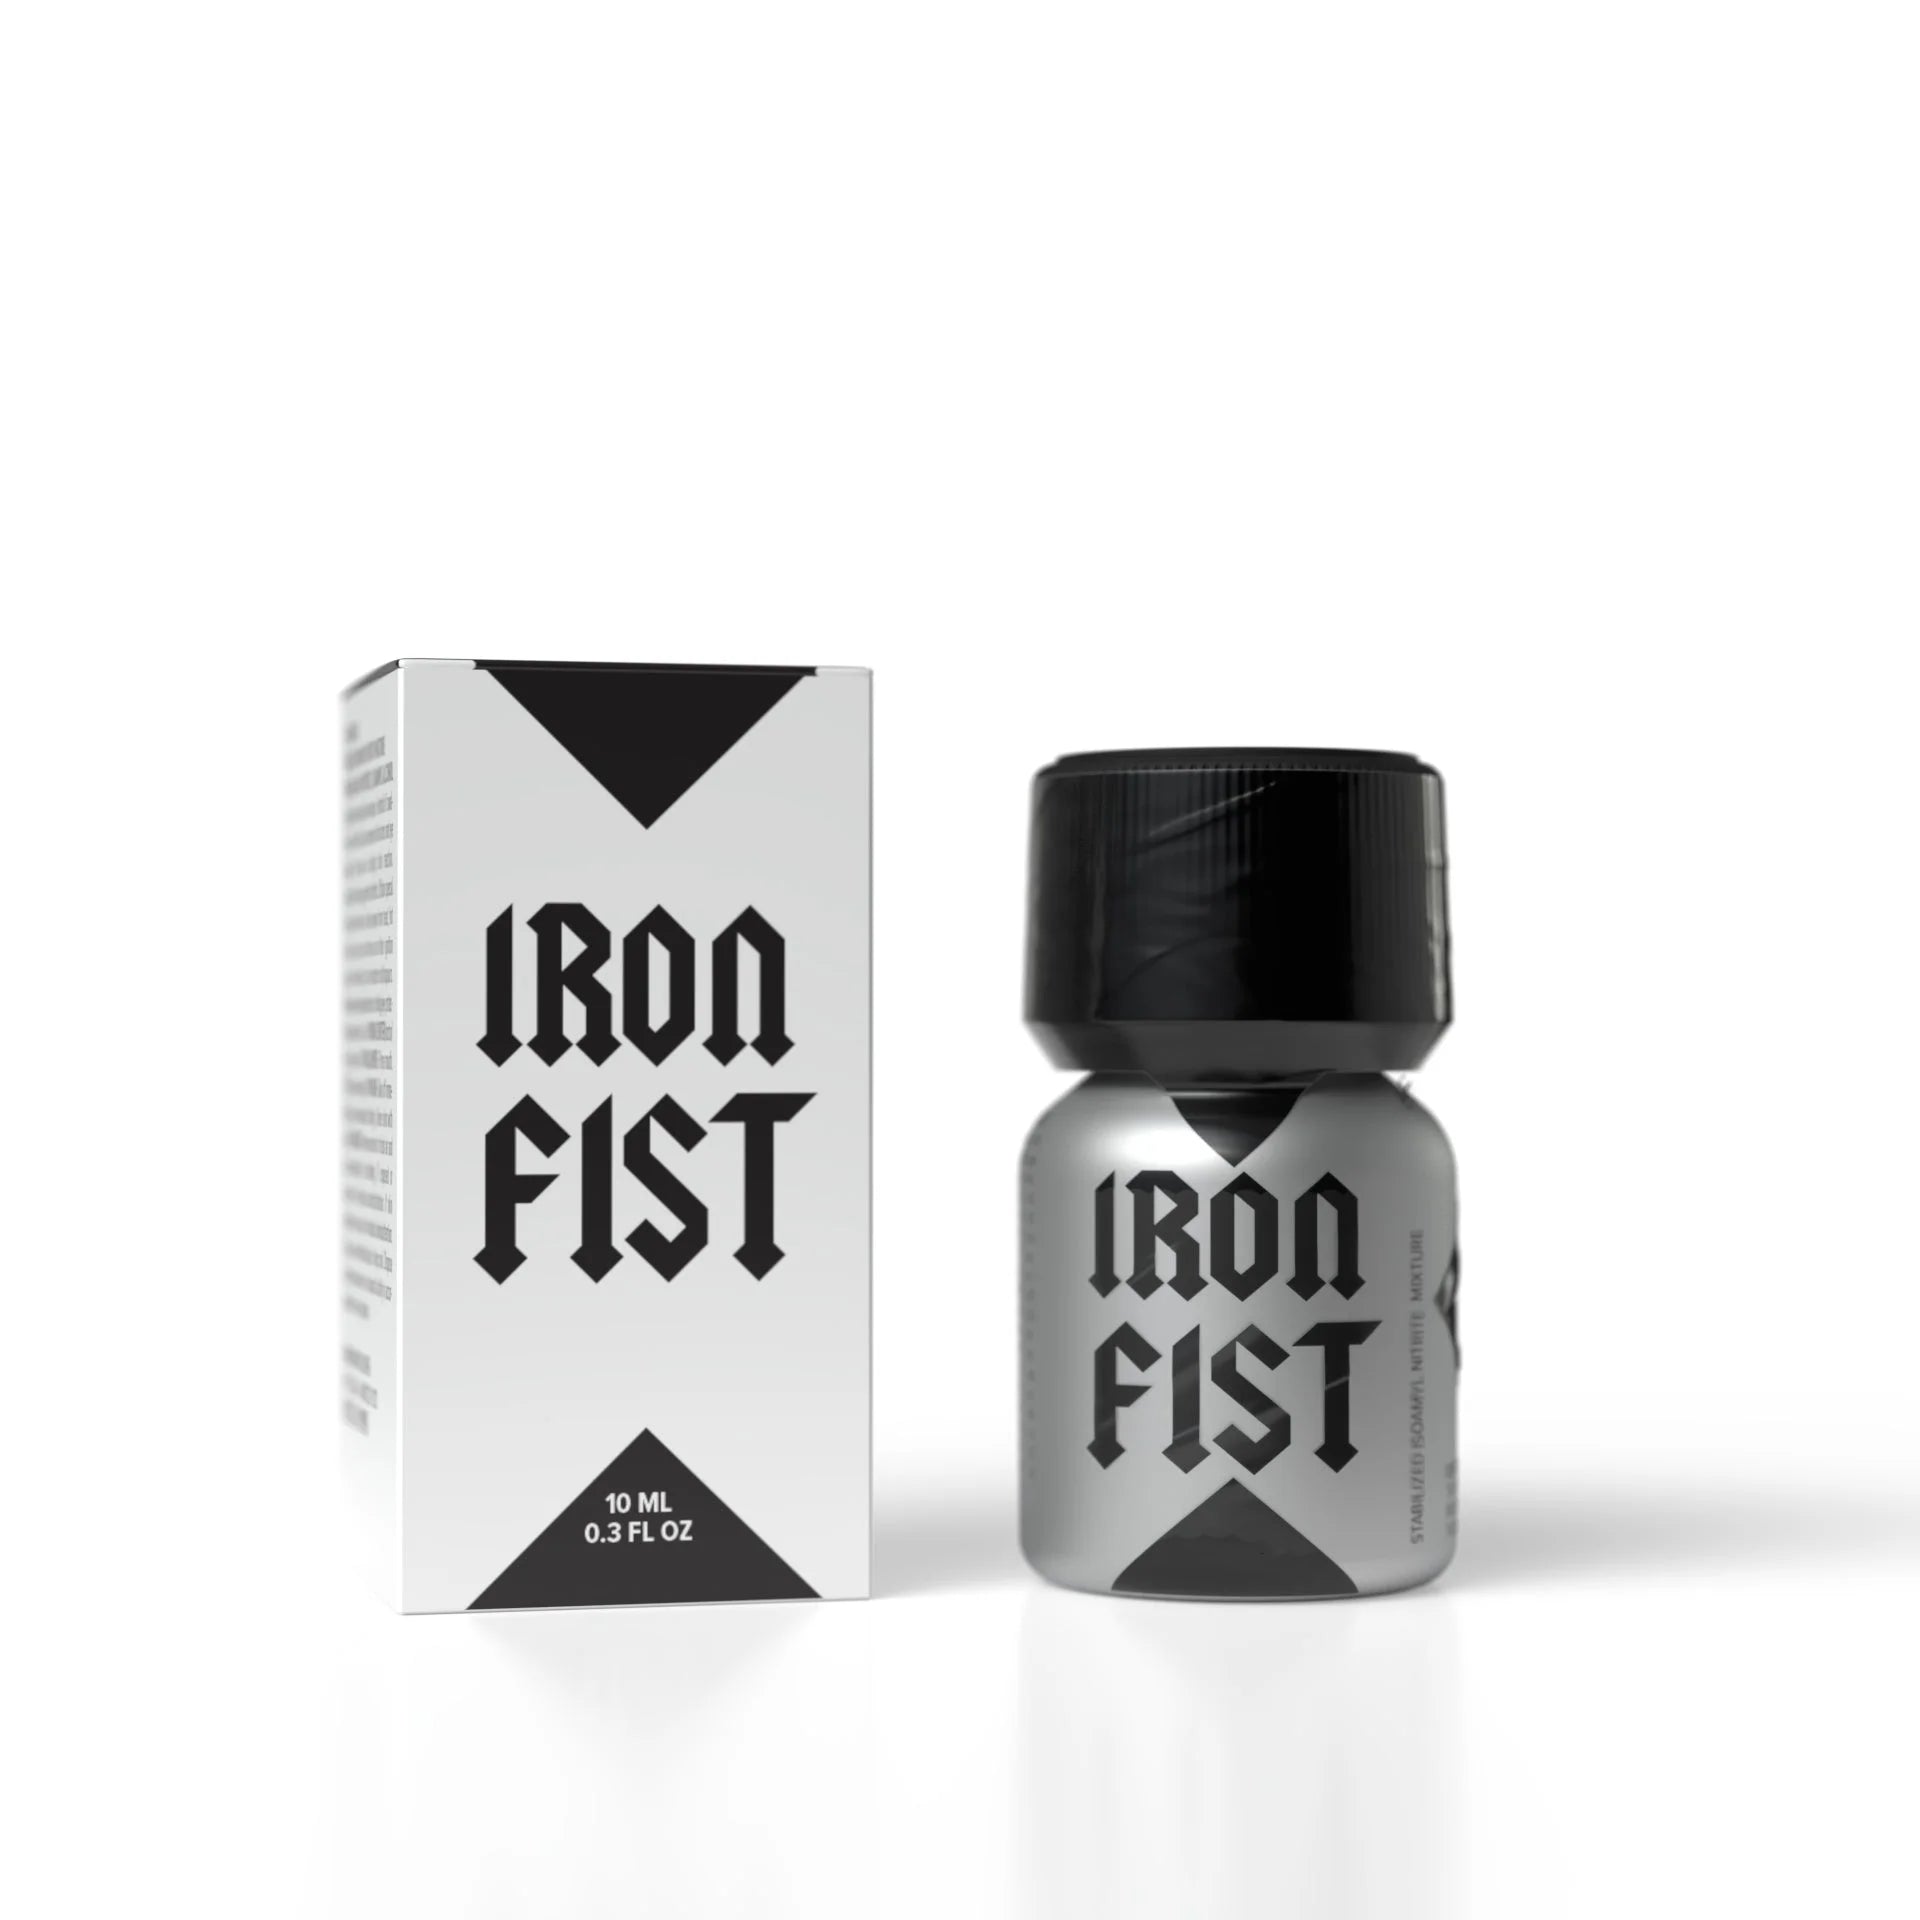 A product photo of a 10ml bottle of Iron Fist Poppers.